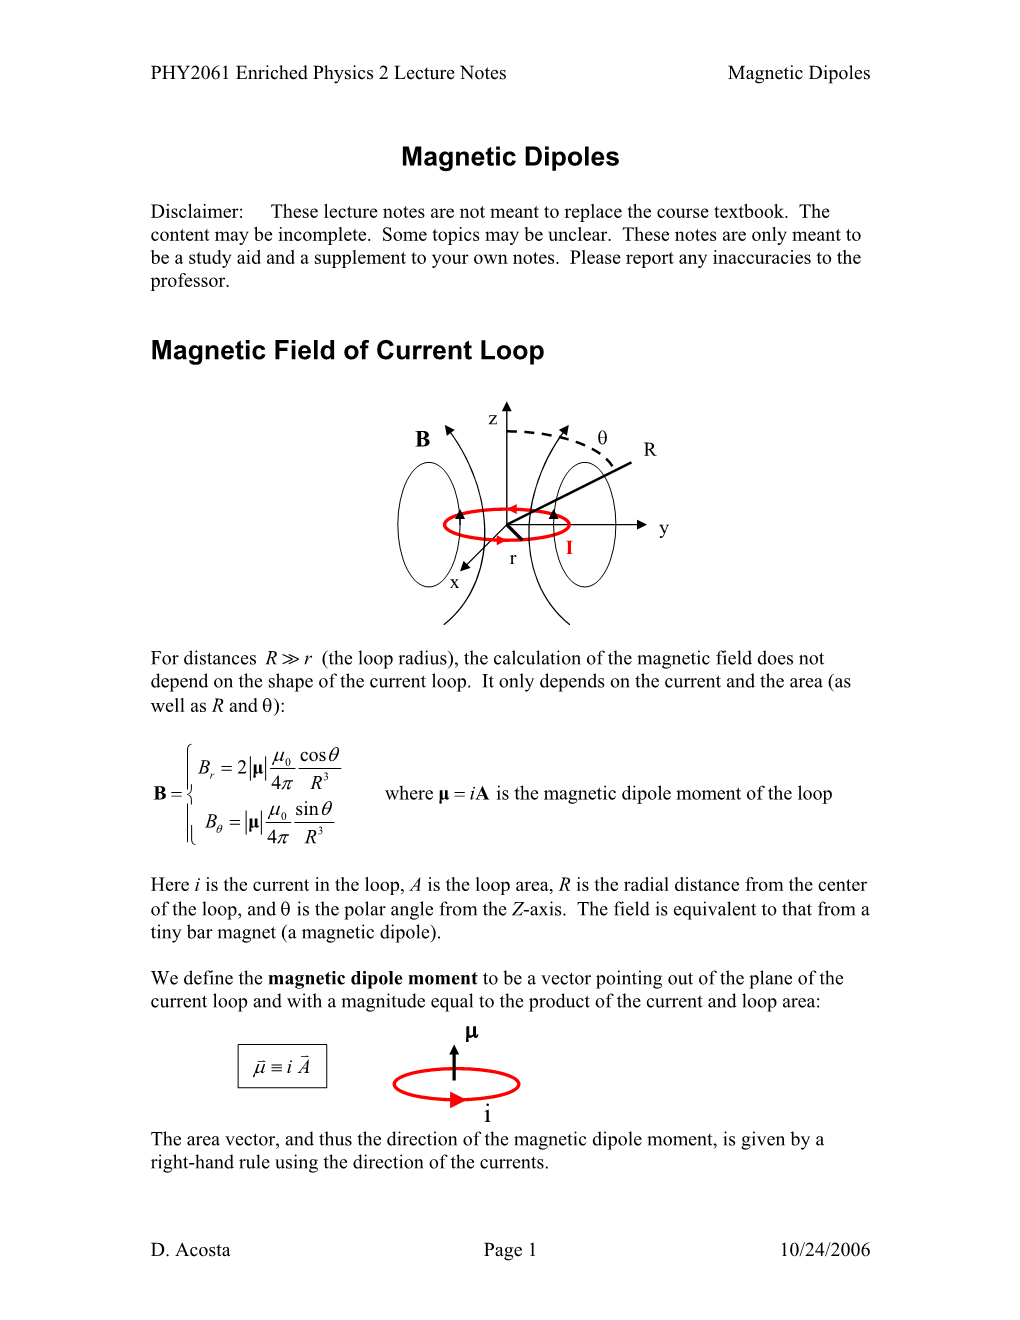 Magnetic Dipoles Magnetic Field of Current Loop I